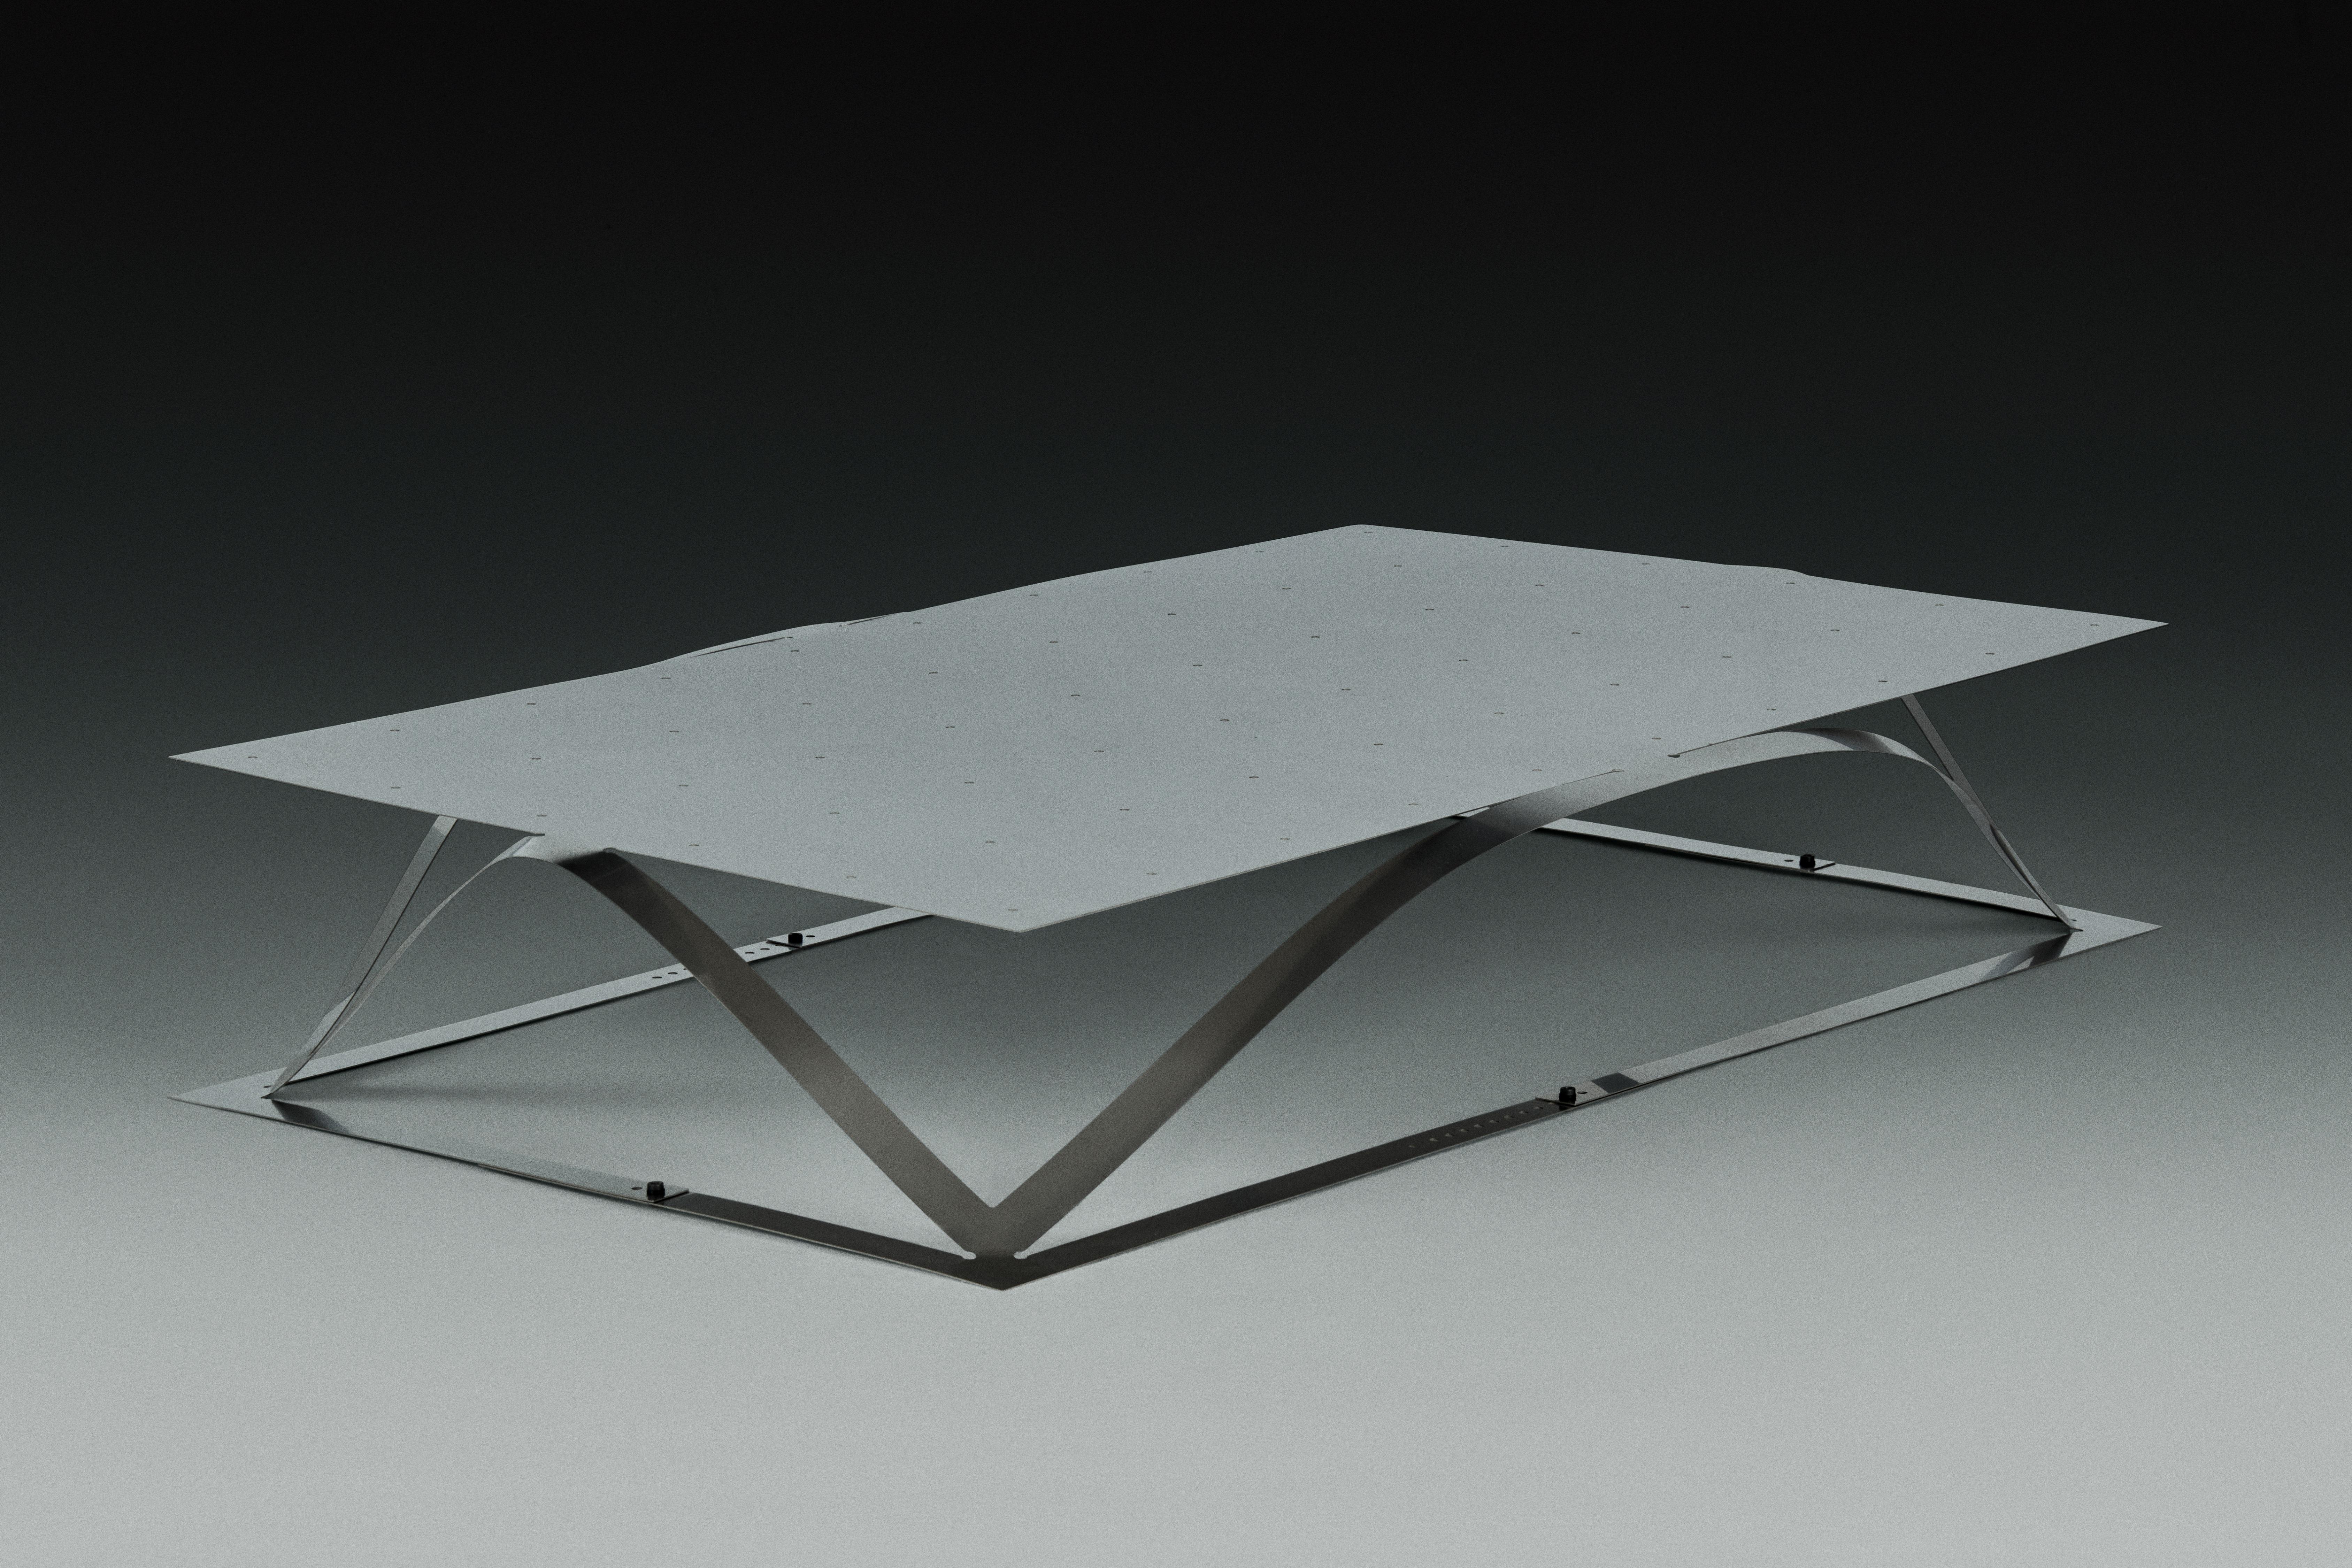 Folio Coffee Table by Kutarq Studio
Materials: Stainless steel.
Dimensions: D 99 x W 22 x H 23 cm

The FOLIO coffee table explores the physical properties of steel, taking on the visual appearance of bent paper.
Planar laser-cuts render a 2D sheet